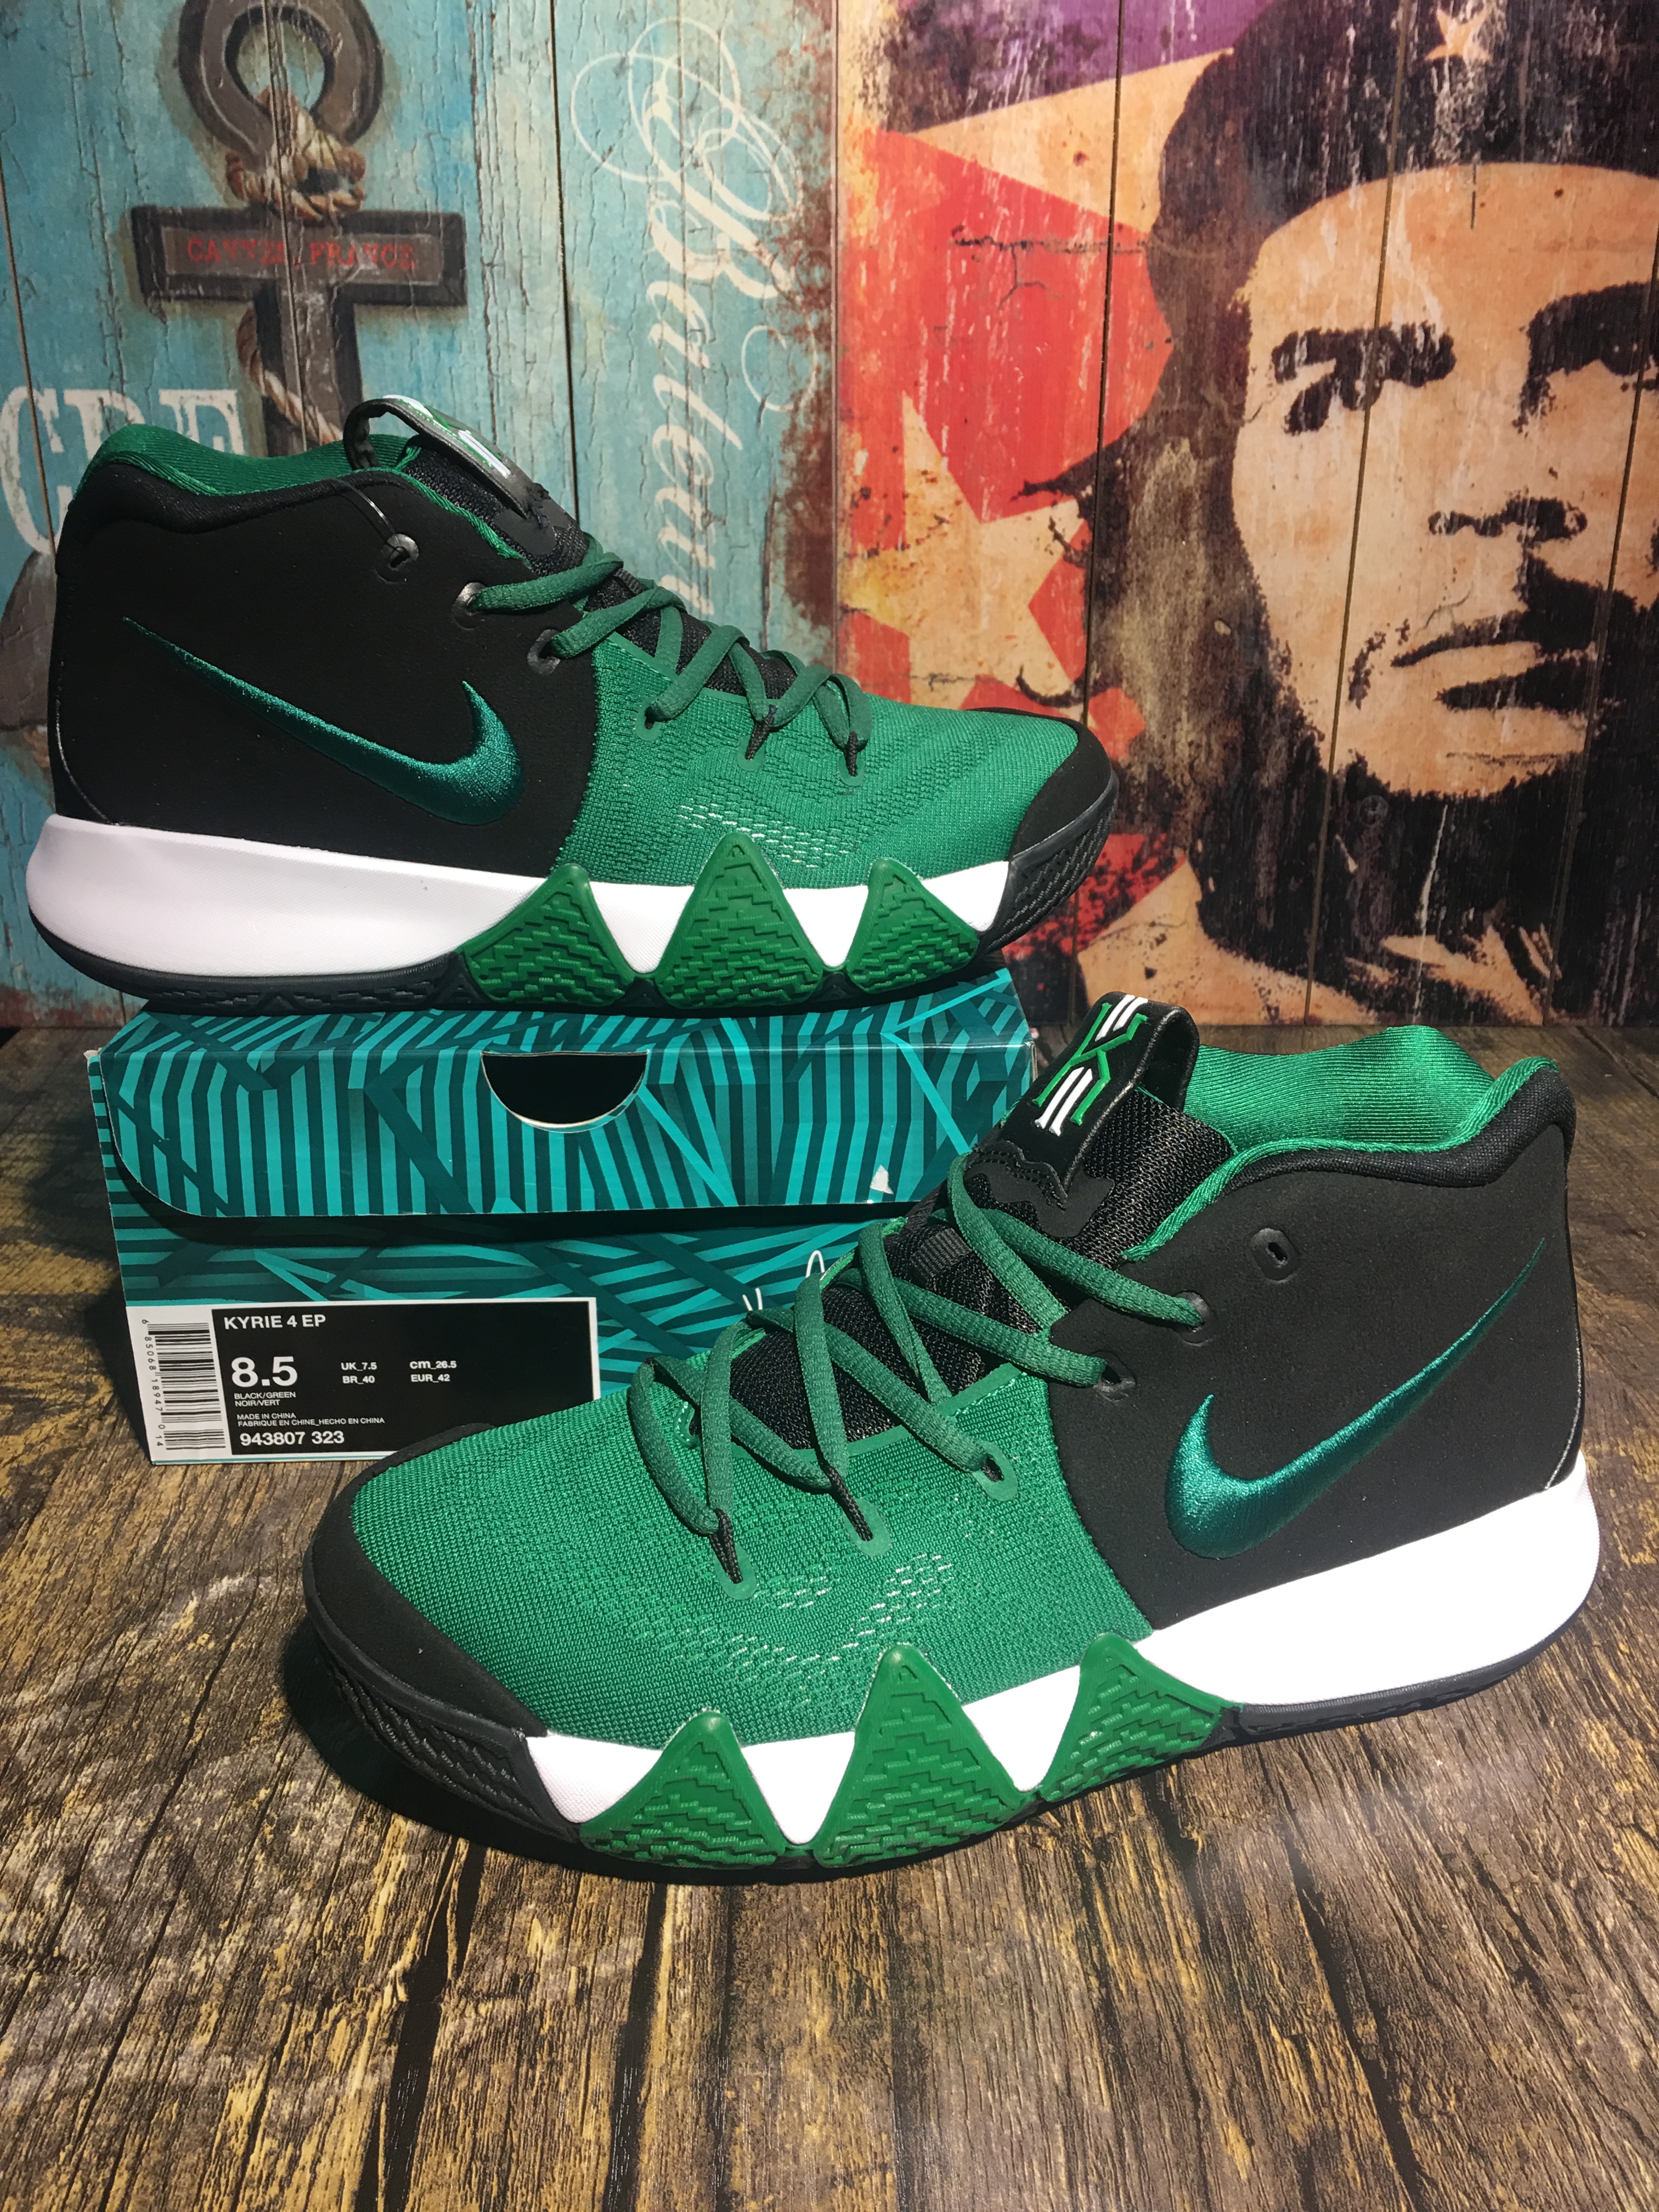 kyrie irving shoes black and green